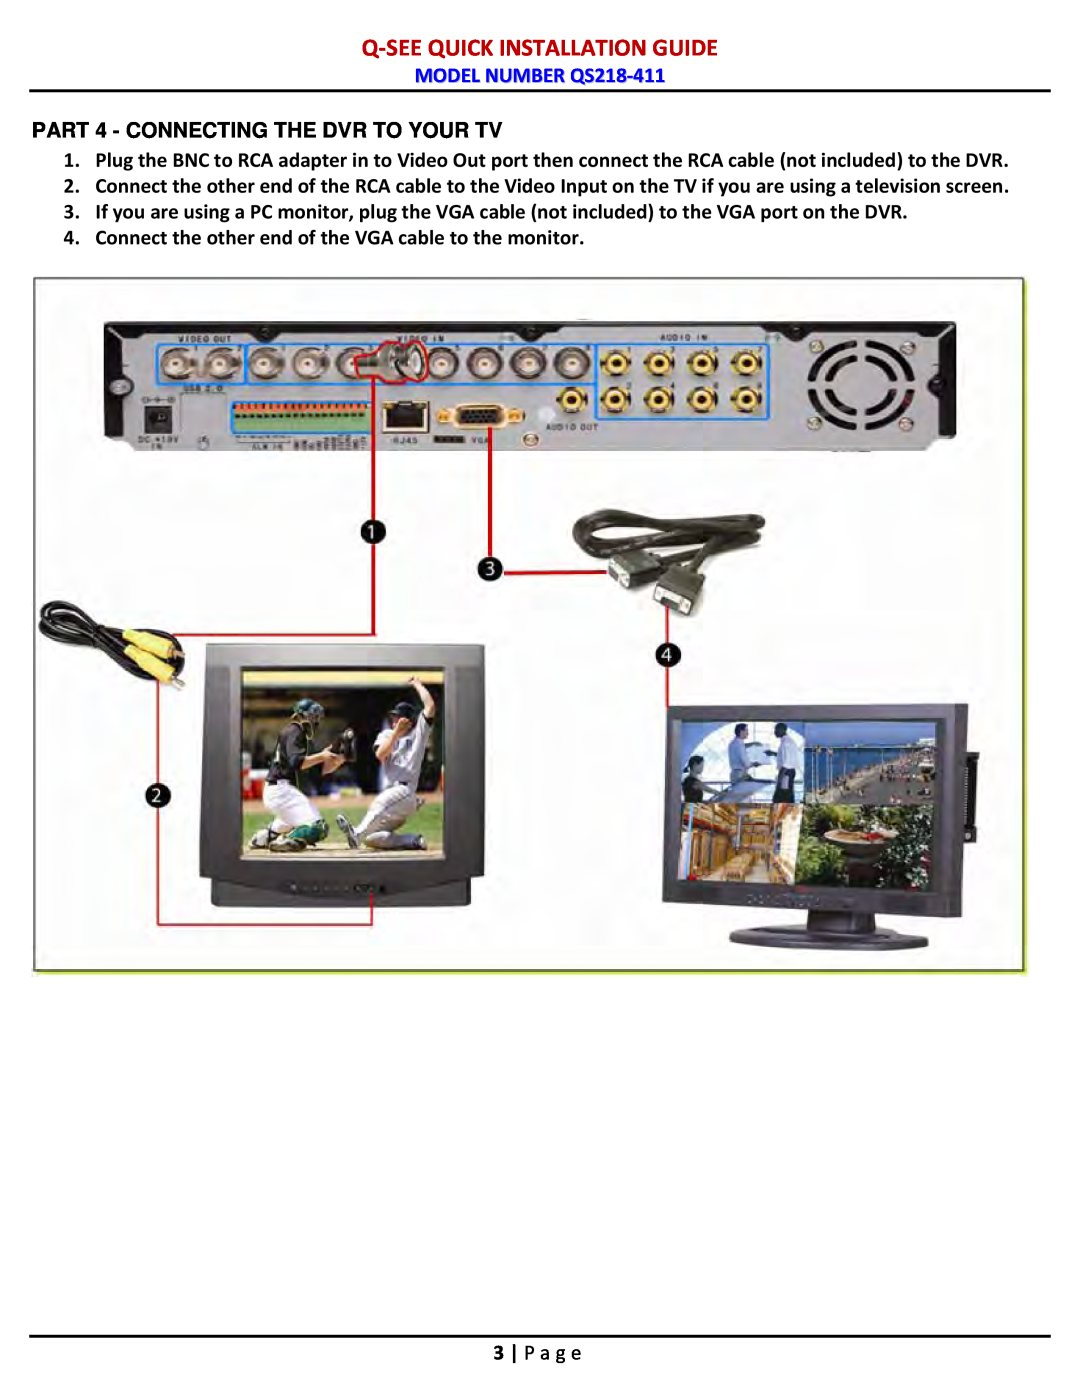 Q-See QS218-811 PART 4 - CONNECTING THE DVR TO YOUR TV, Q-Seequick Installation Guide, MODEL NUMBER QS218-411, P a g e 